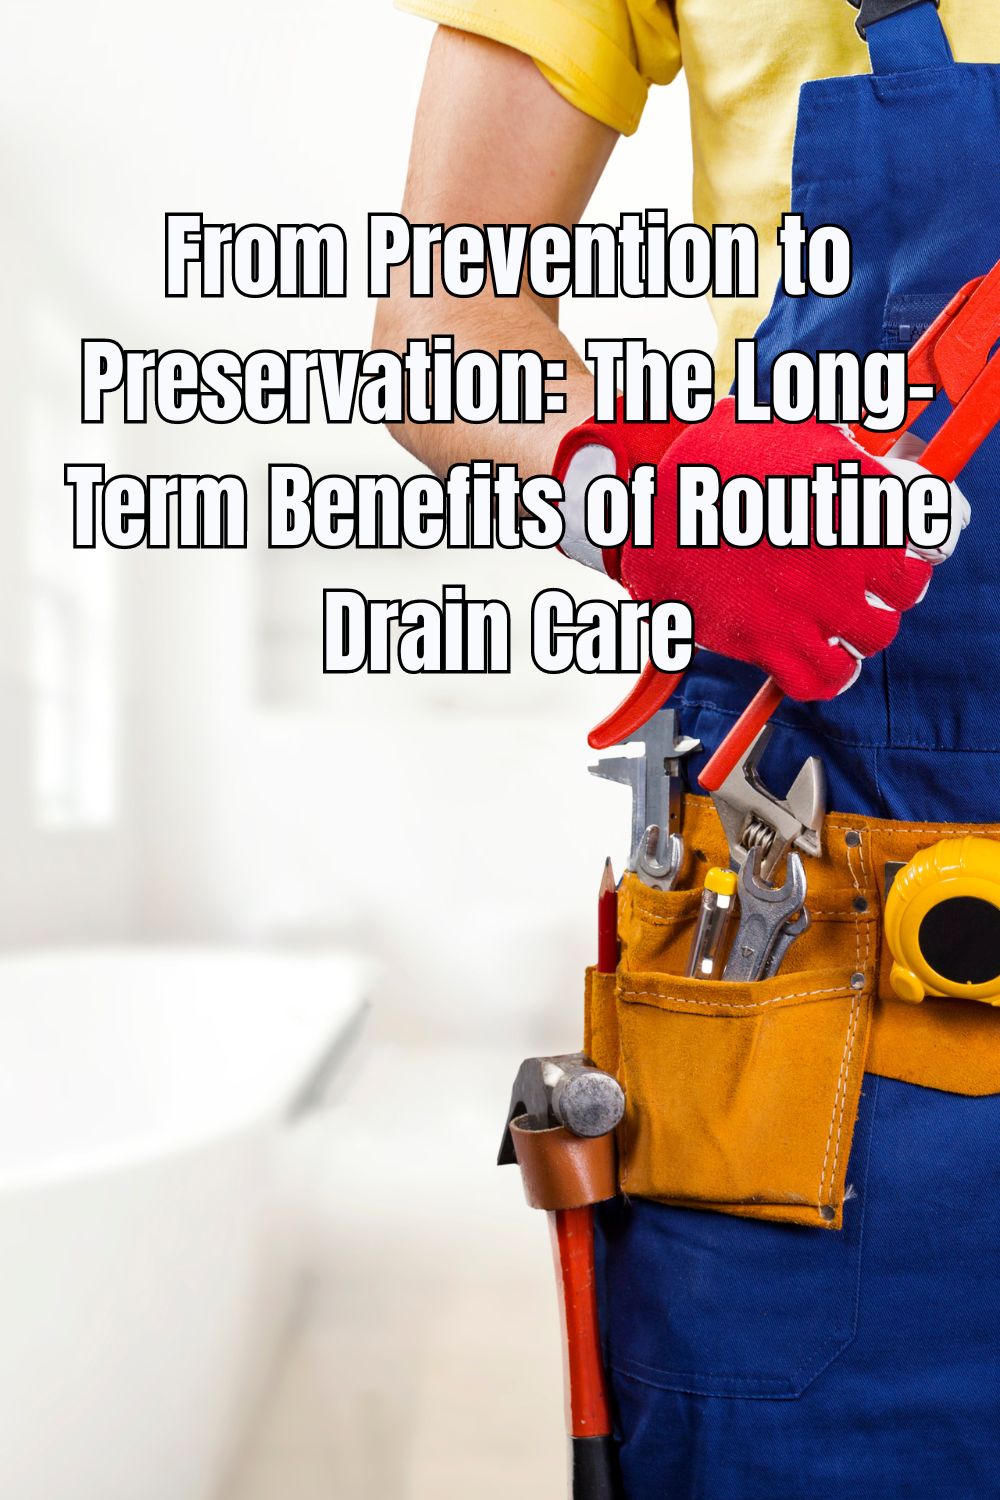 From Prevention to Preservation: The Long-Term Benefits of Routine Drain Care